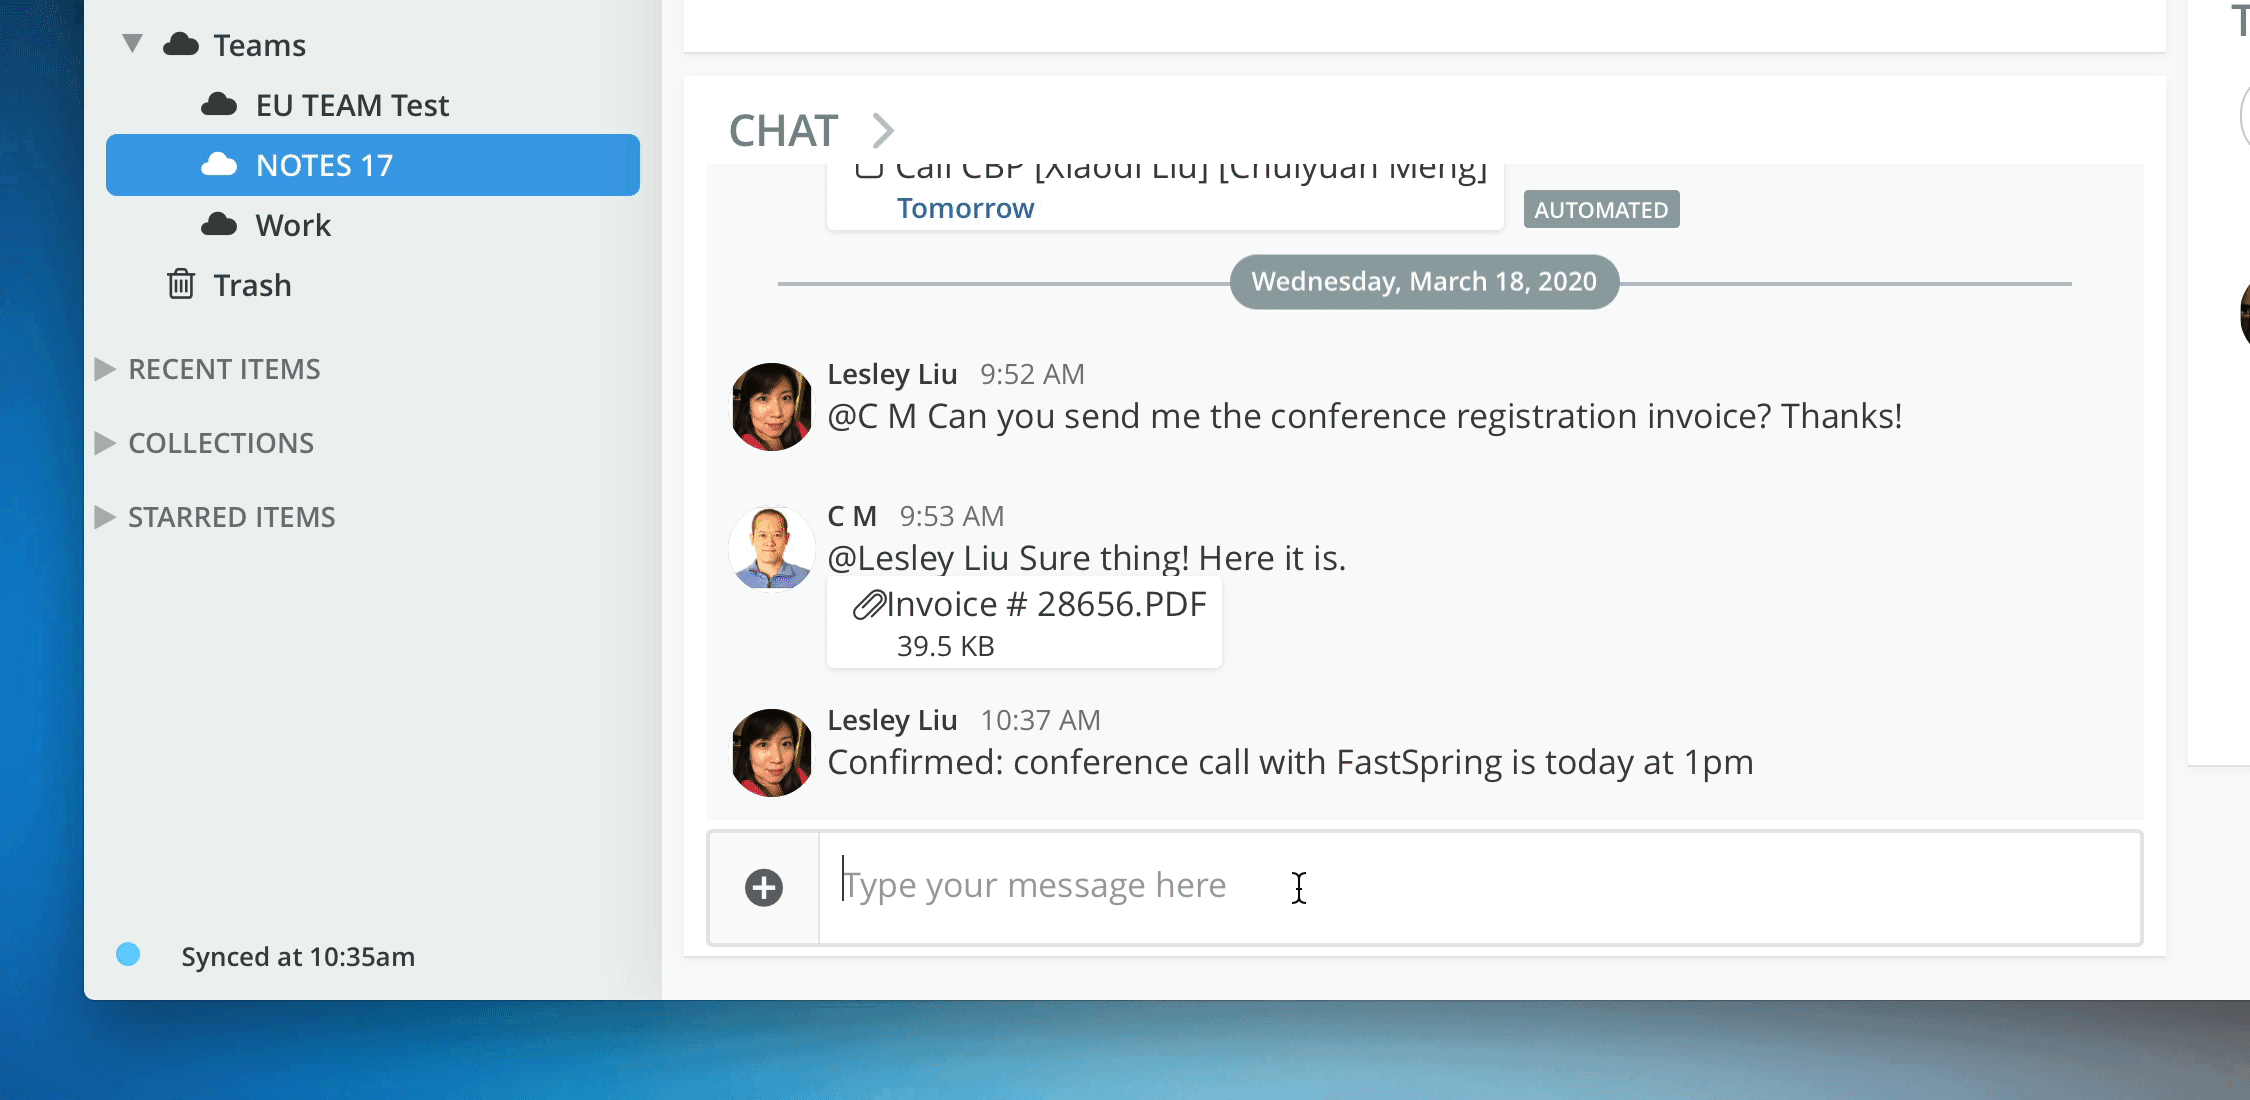 The new Team Chat feature in Pagico 9.2